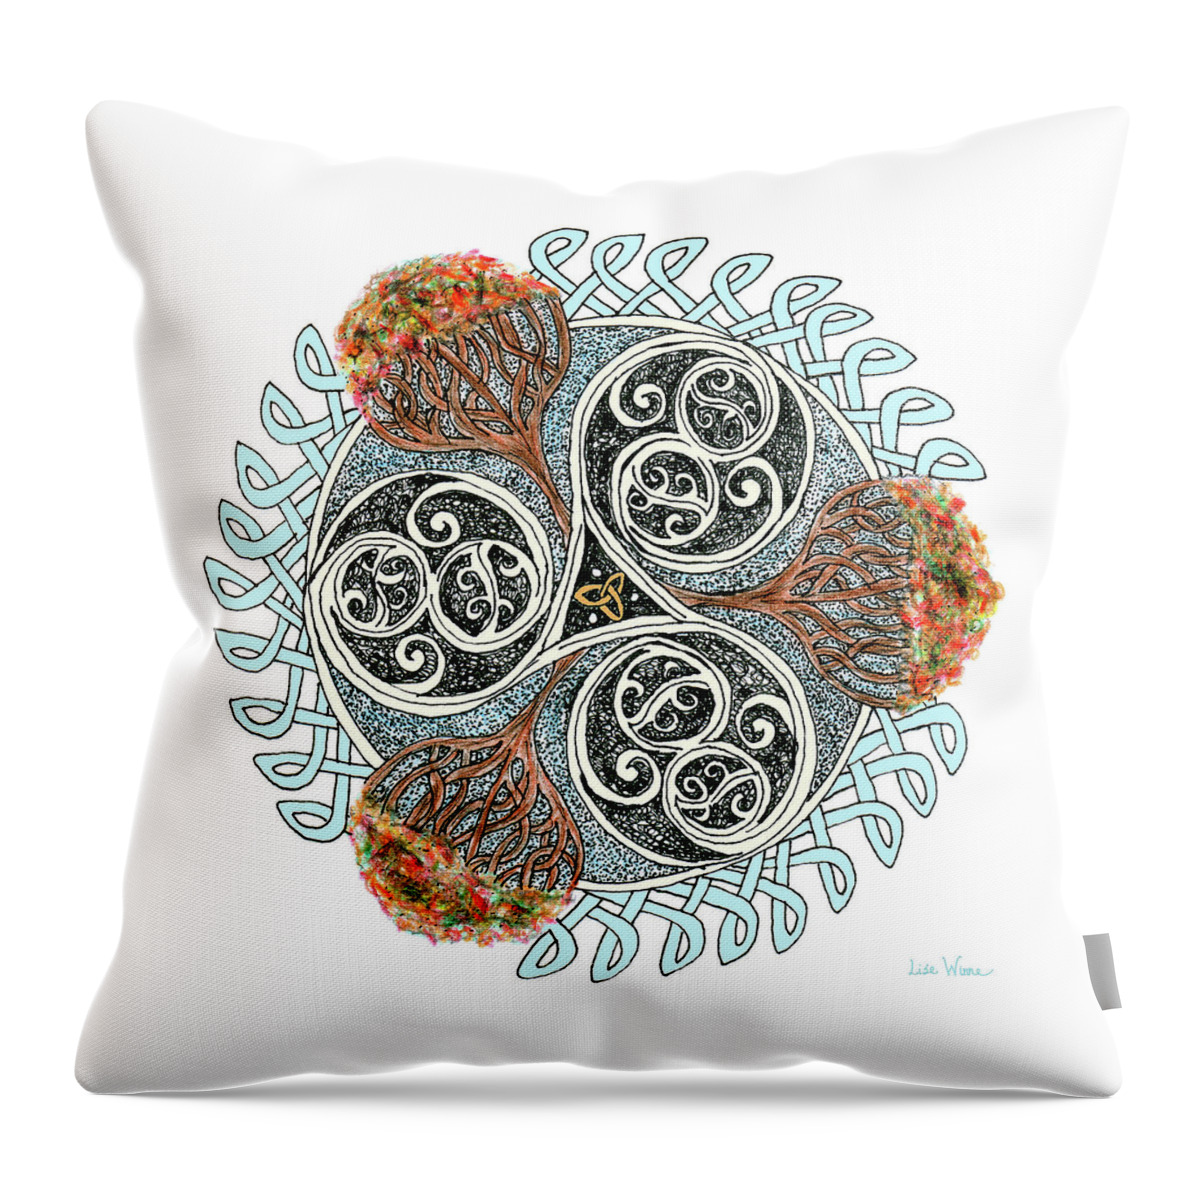 Lise Winne Throw Pillow featuring the drawing Celtic Knot with Autumn Trees by Lise Winne